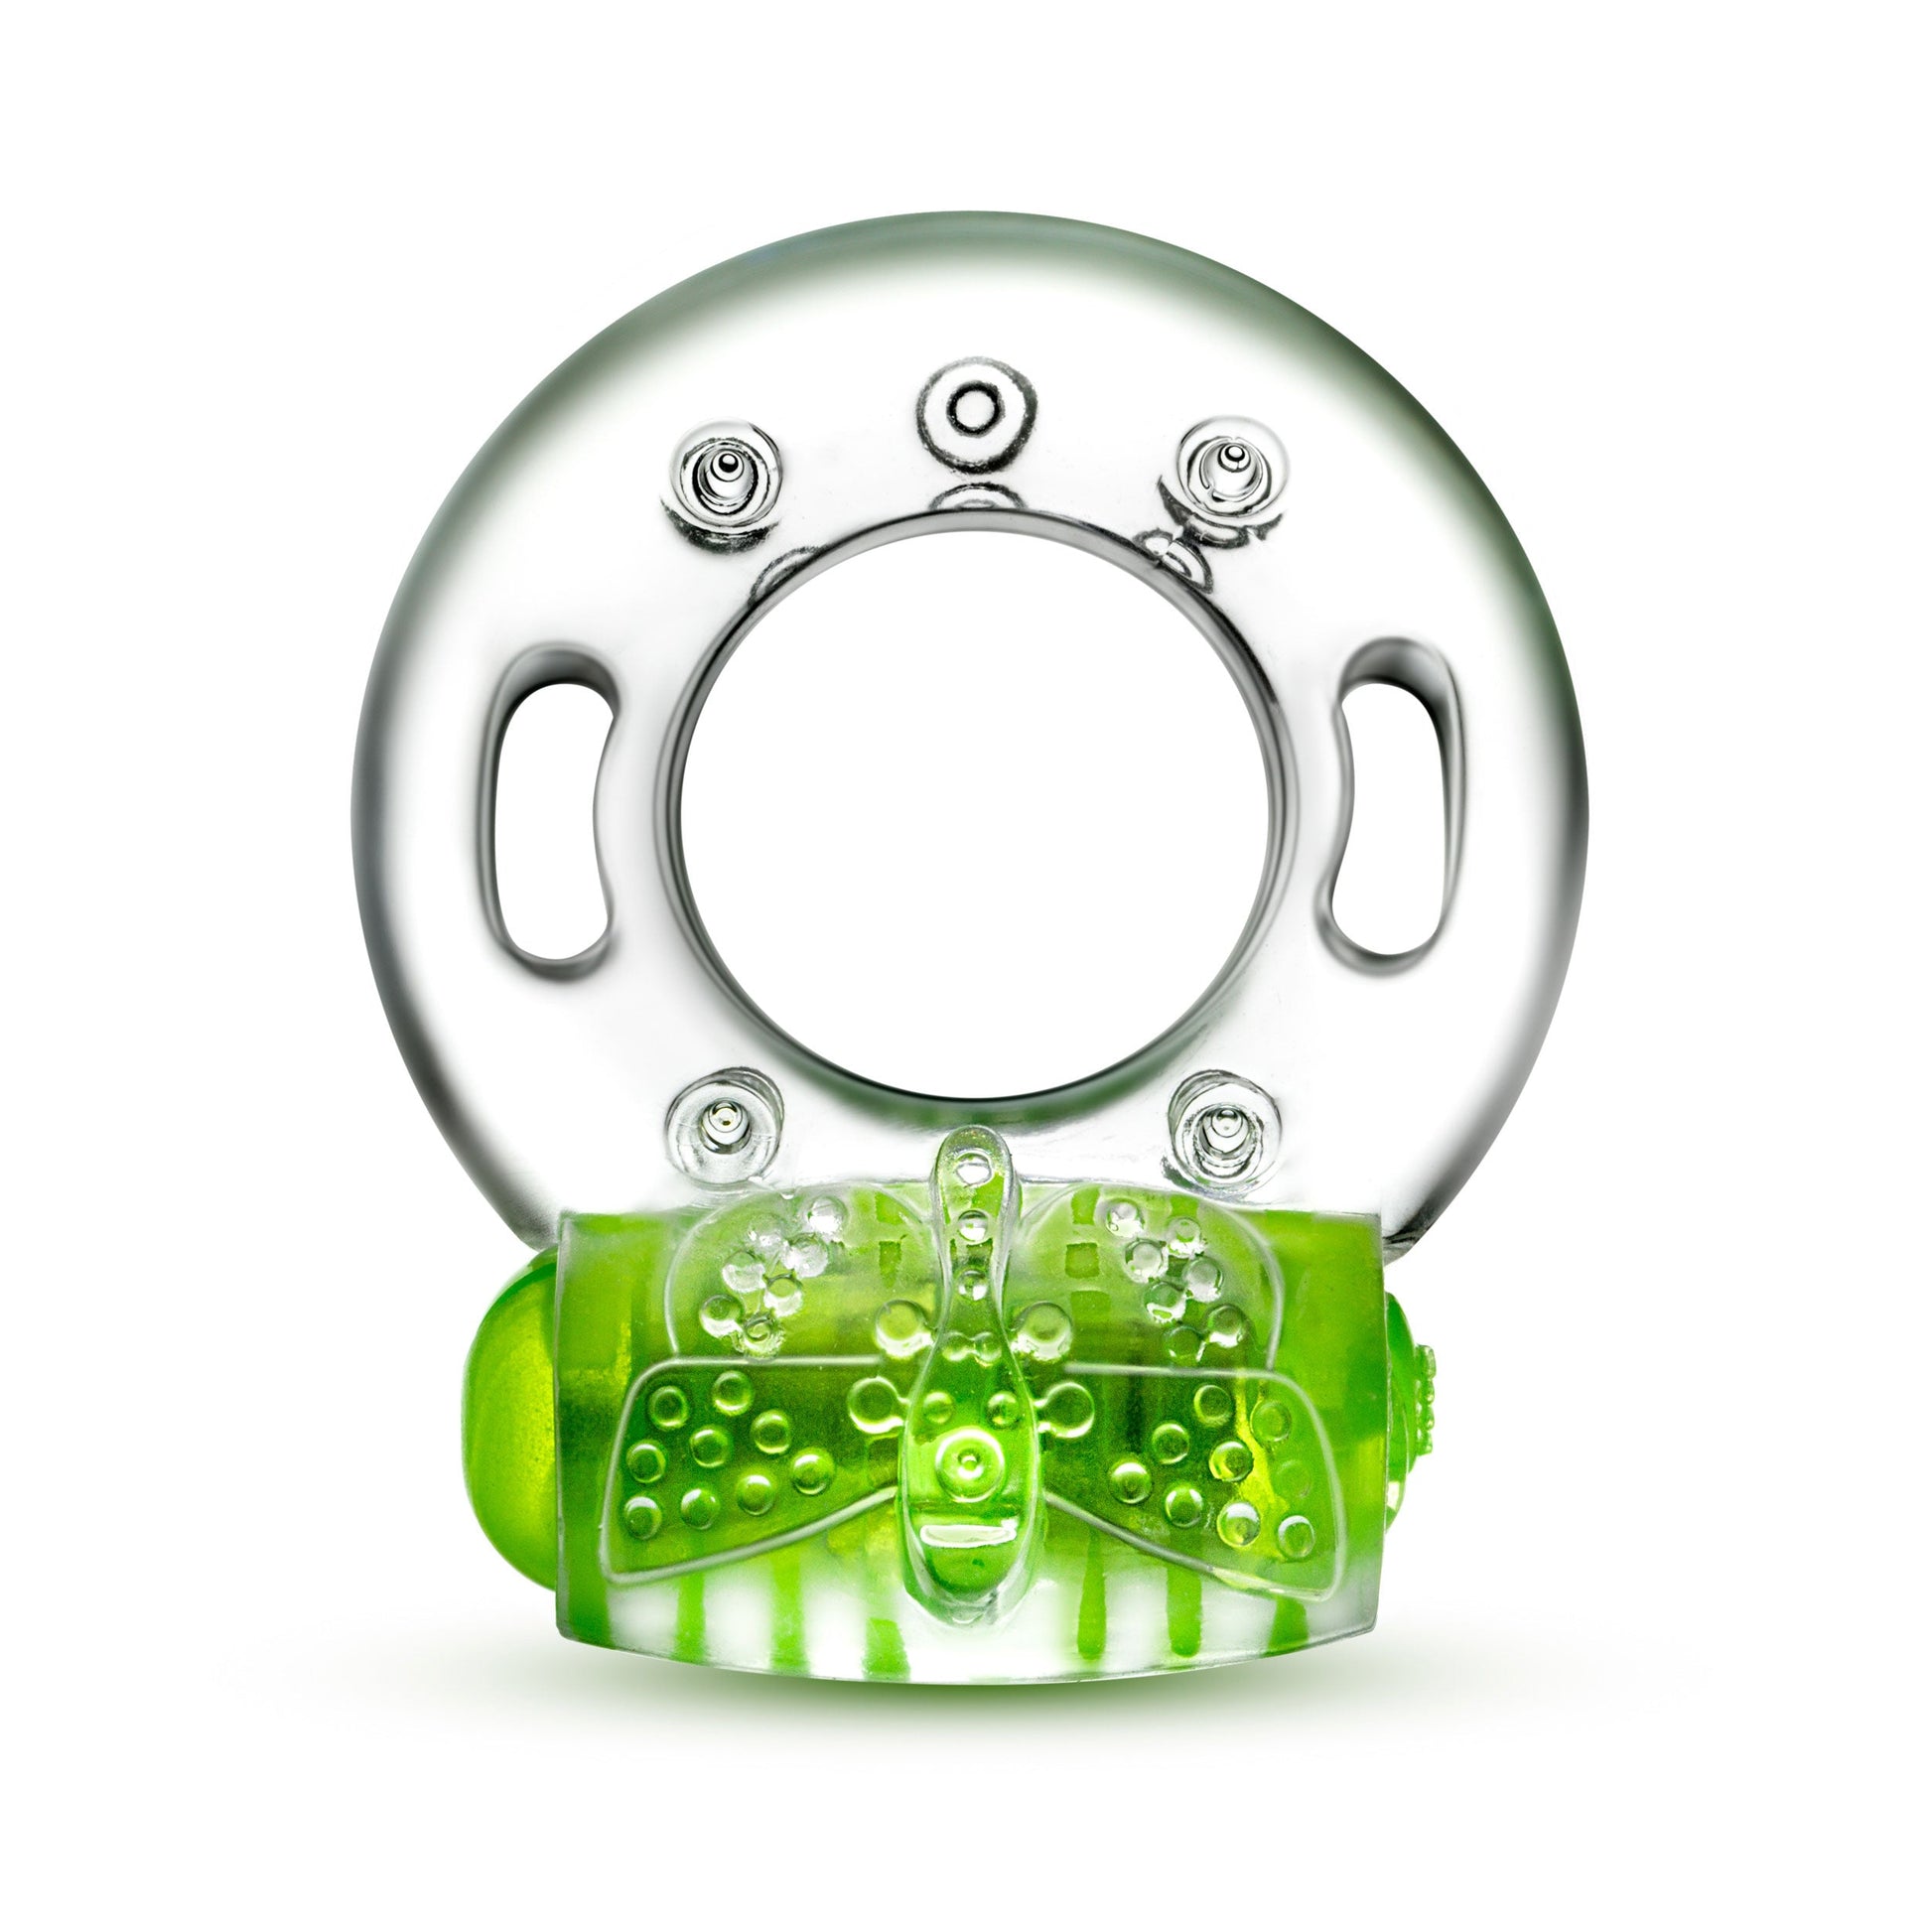 Play With Me - Arouser Vibrating C-Ring - Green BL-30622